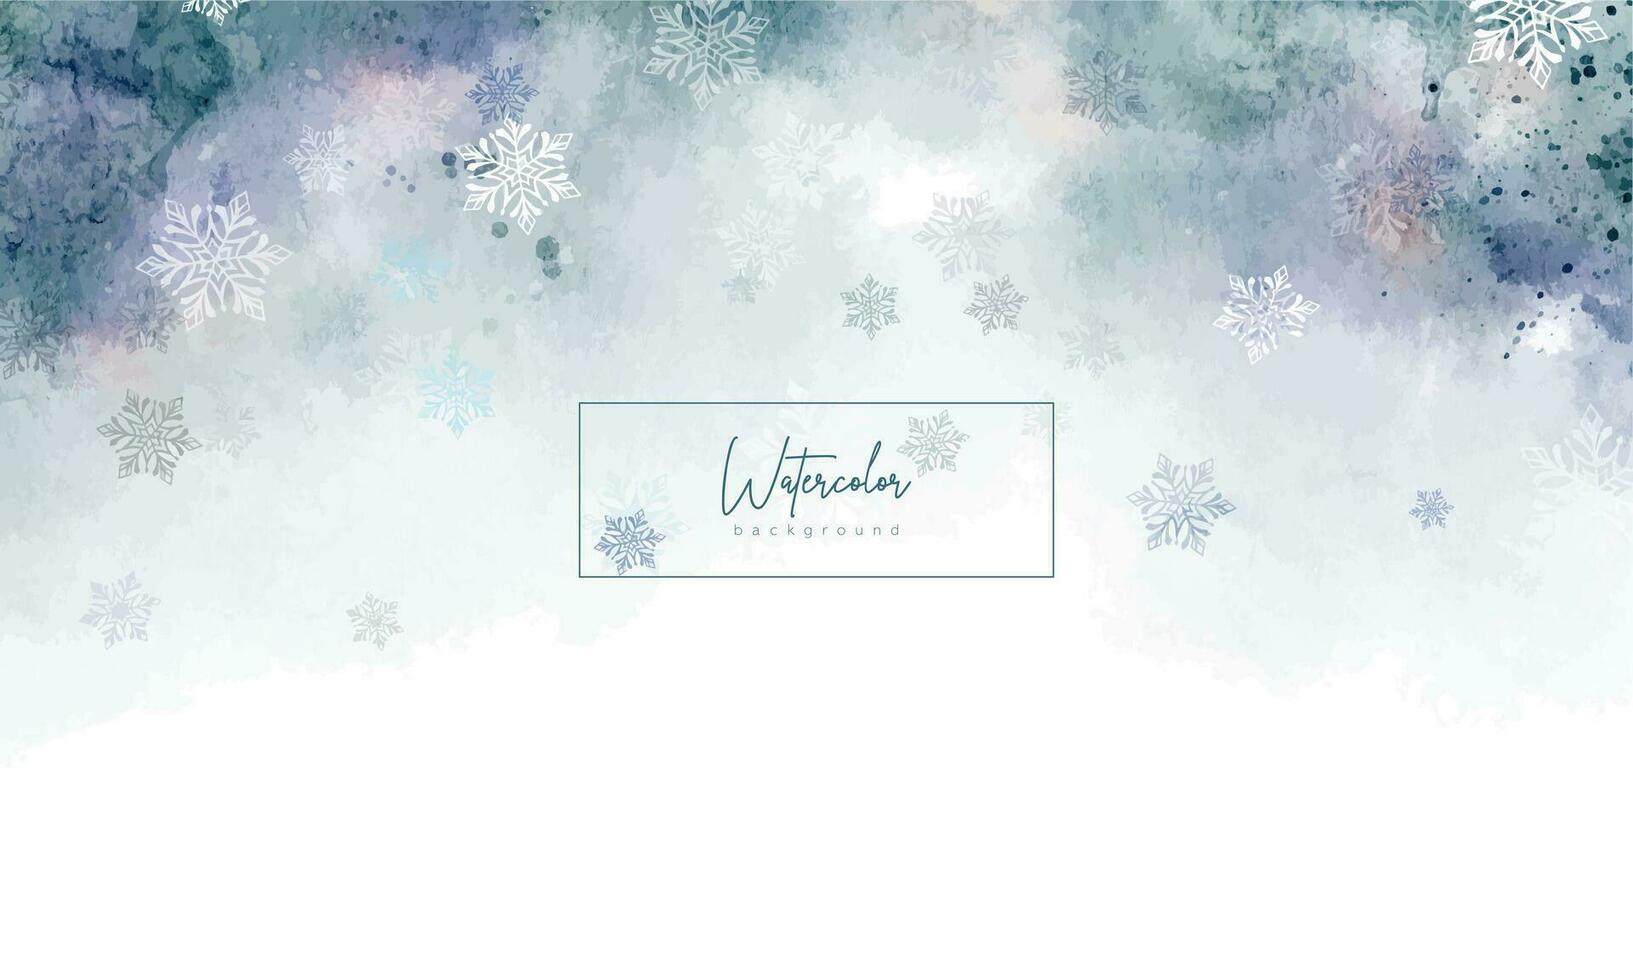 Abstract watercolor dark blue and violett background with snowflakes. Vector illustration for advertising, presentation, design, invitation, social media, web, flyer, card and banner